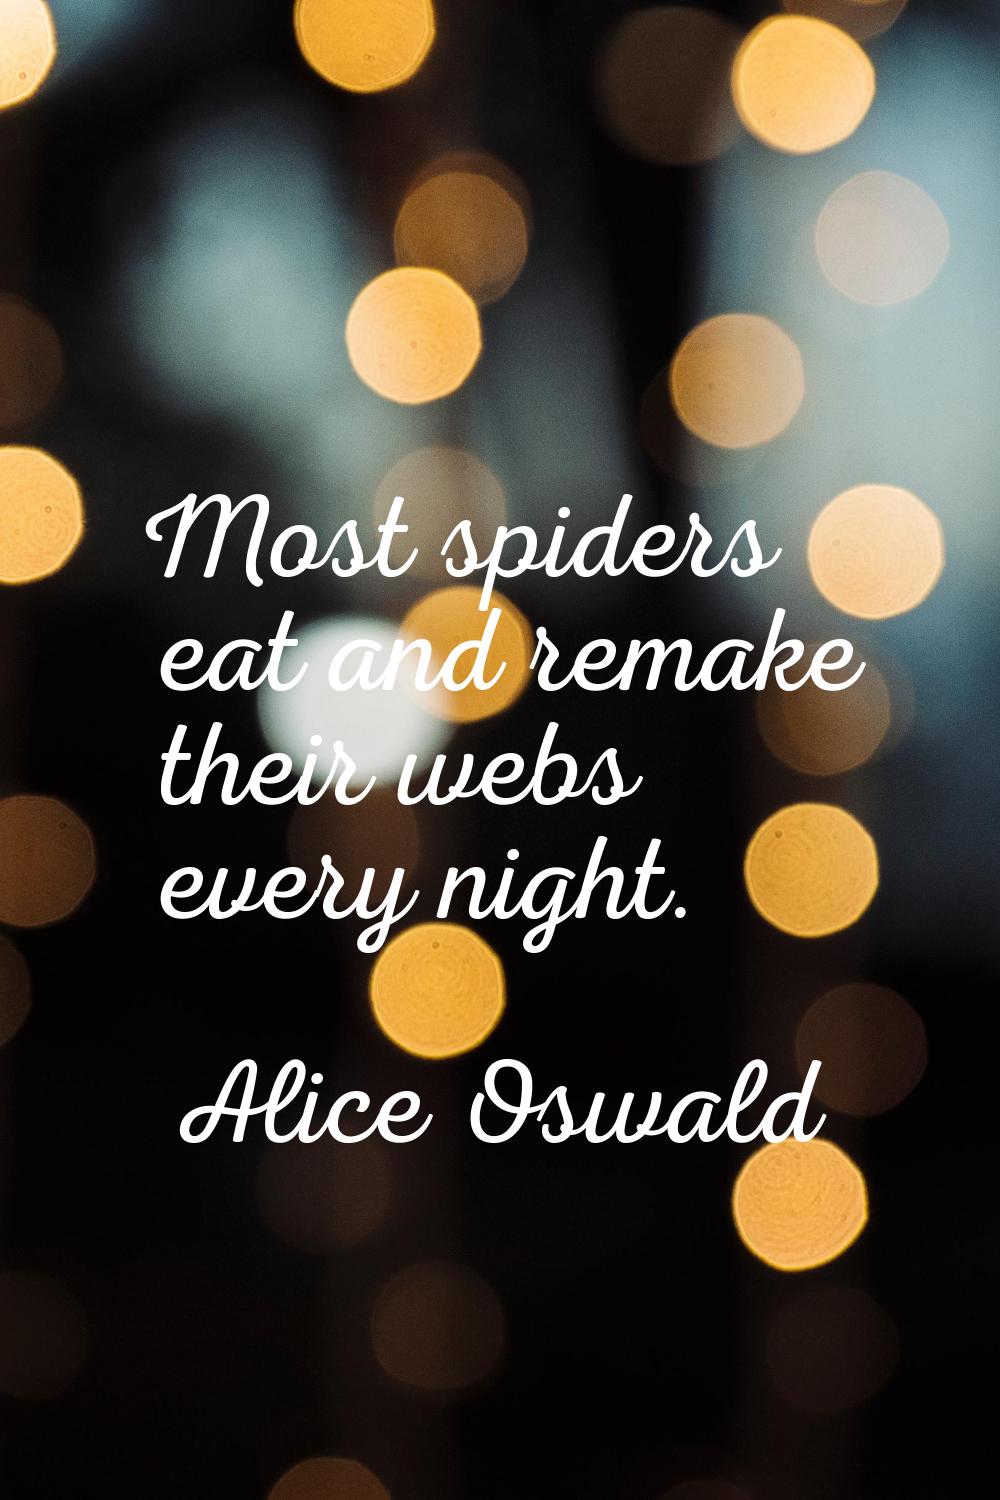 Most spiders eat and remake their webs every night.